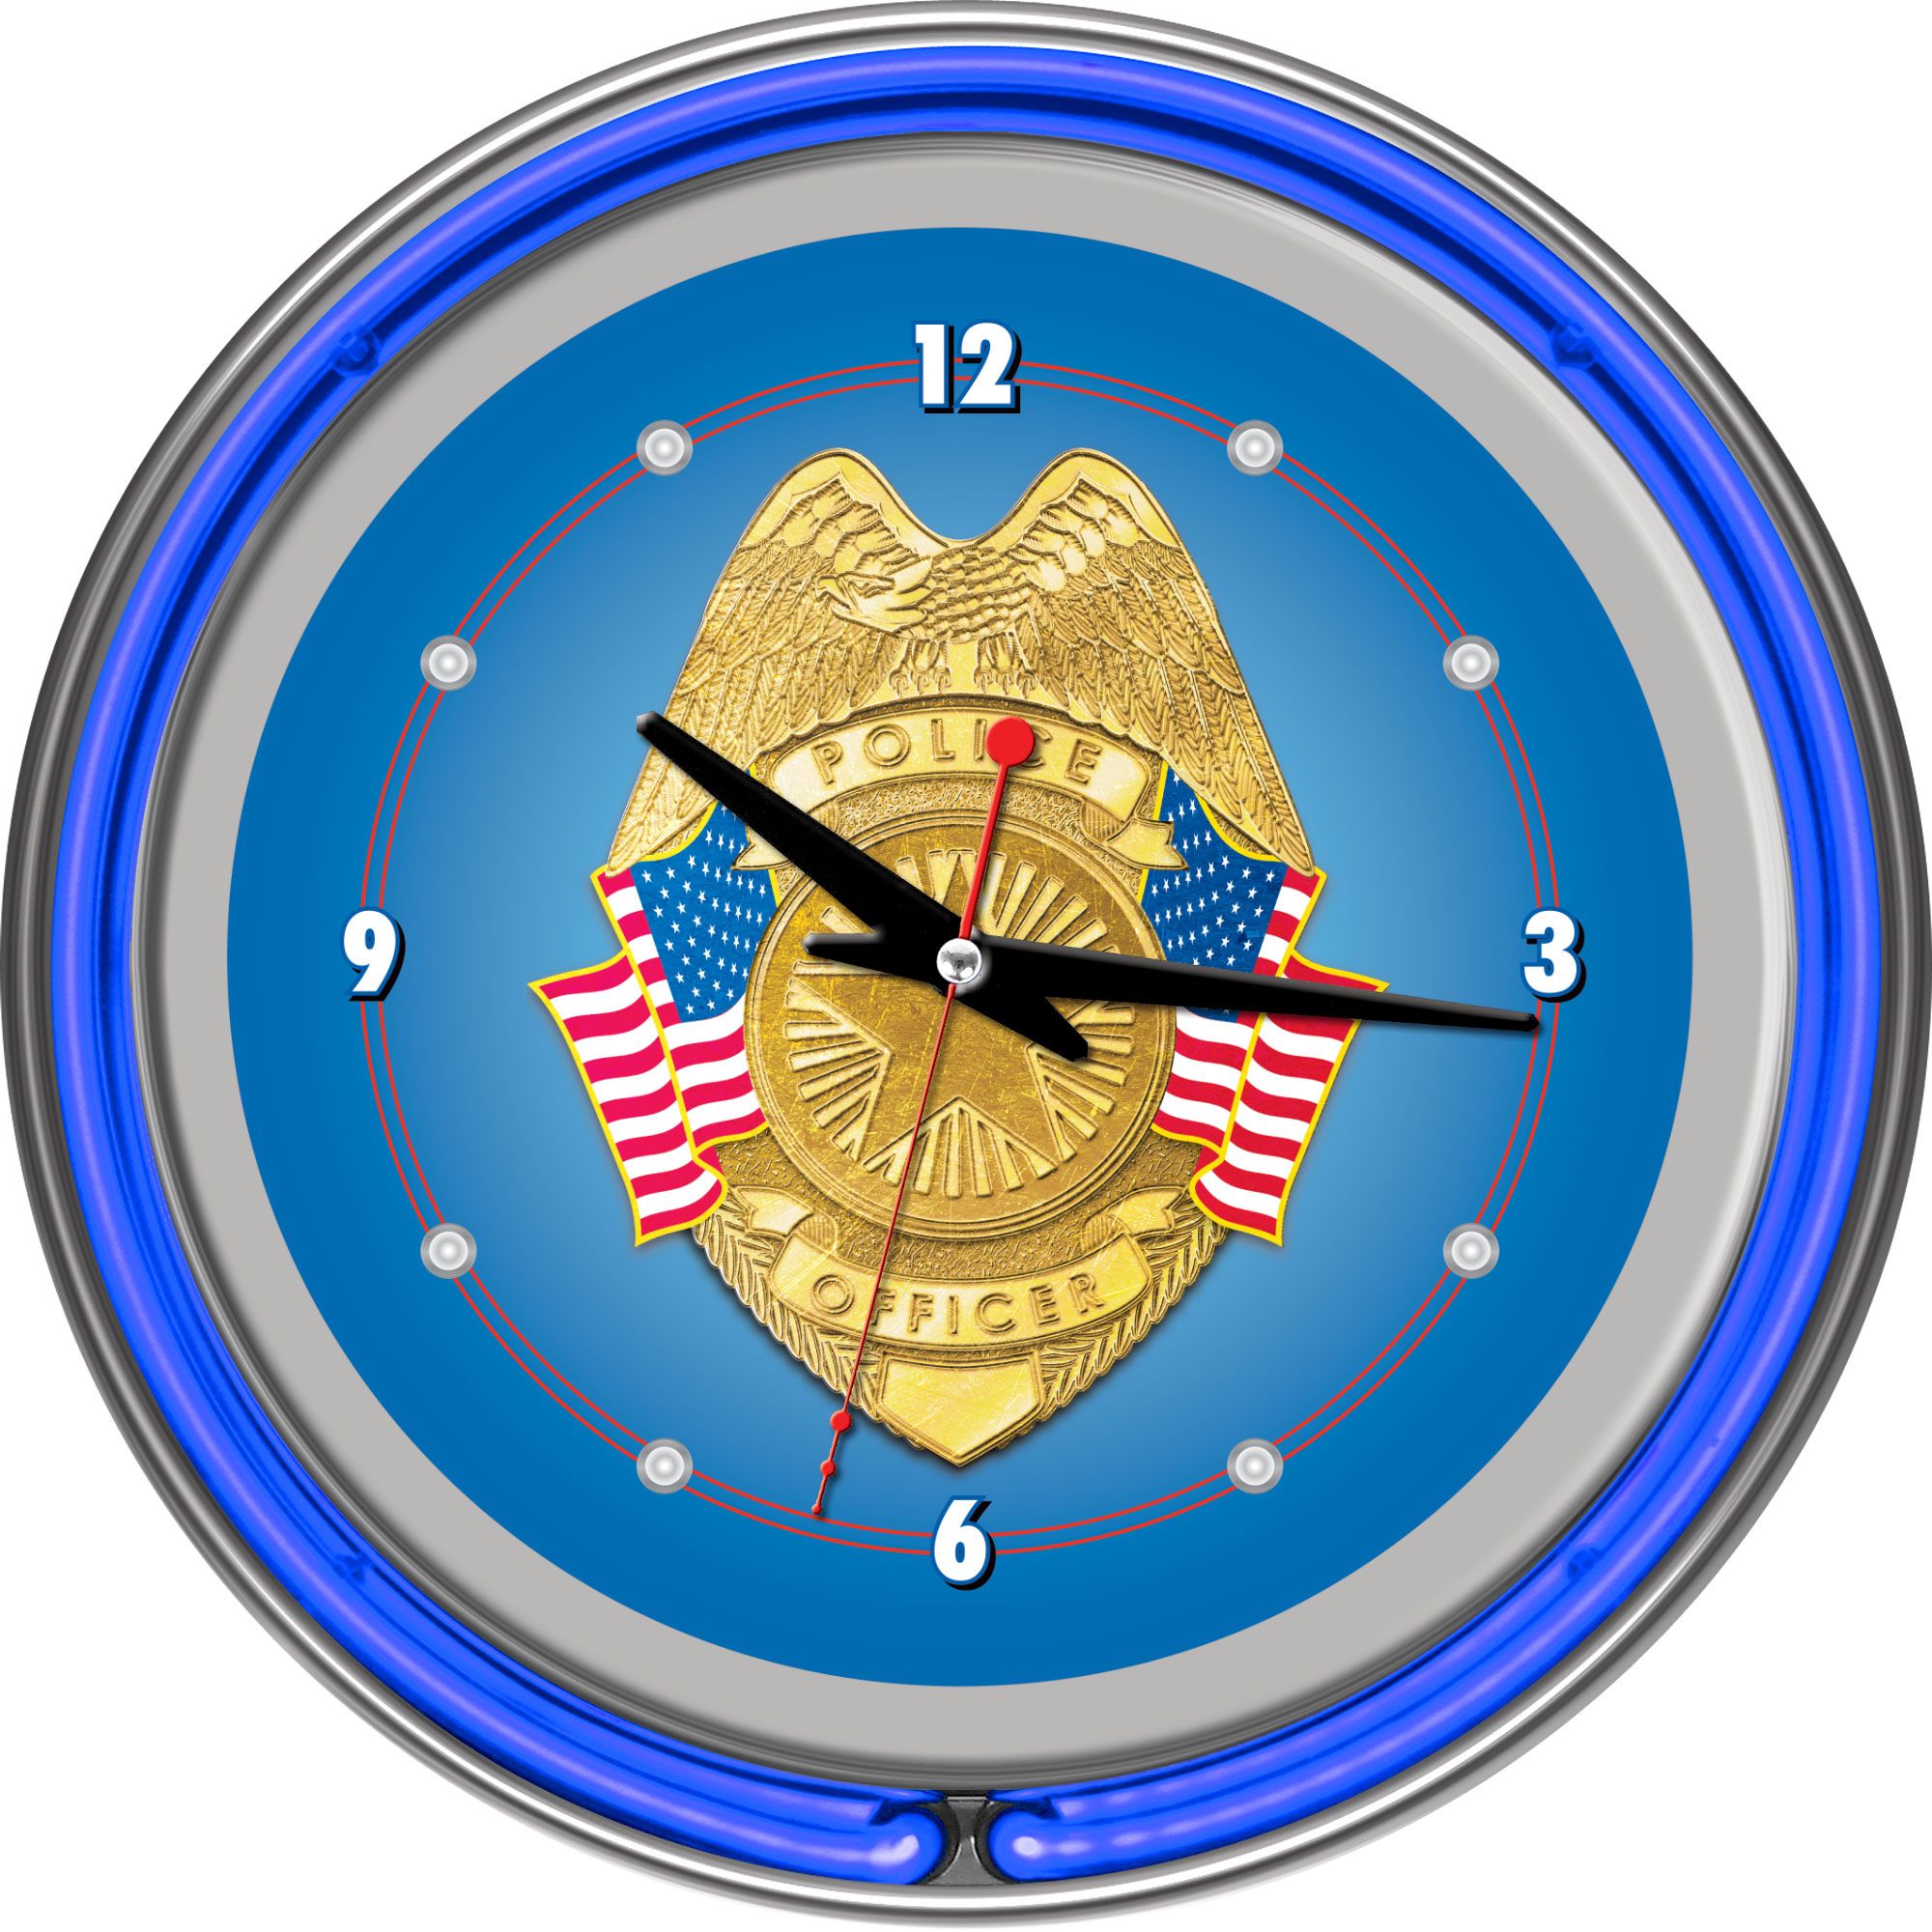 Trademark Police Officer Chrome Double Ring Neon Clock